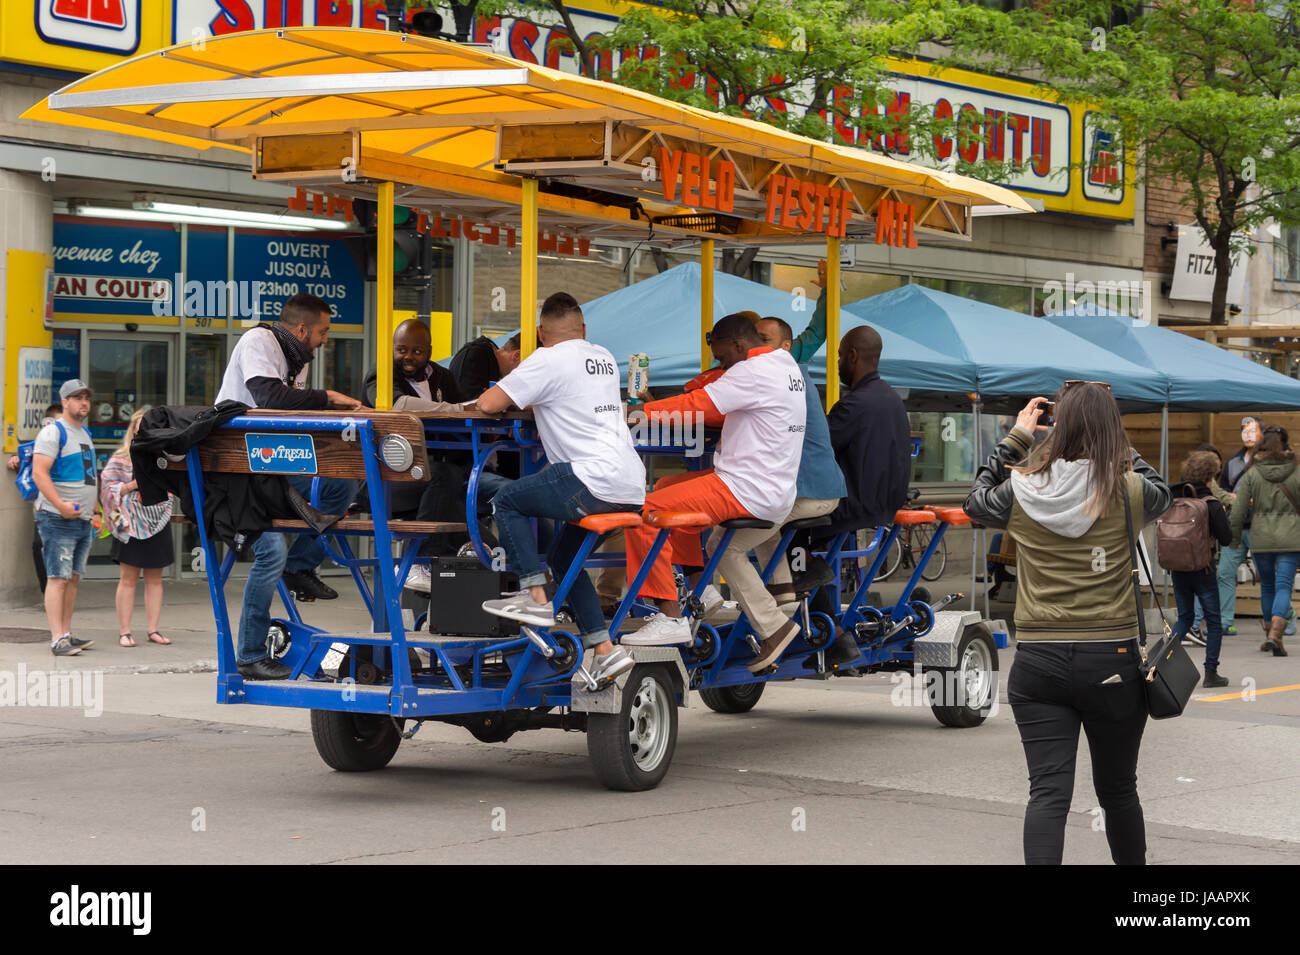 Montreal, Canada - 03 June 2017: People on 'Velo Festif' party bike in the Plateau Stock Photo